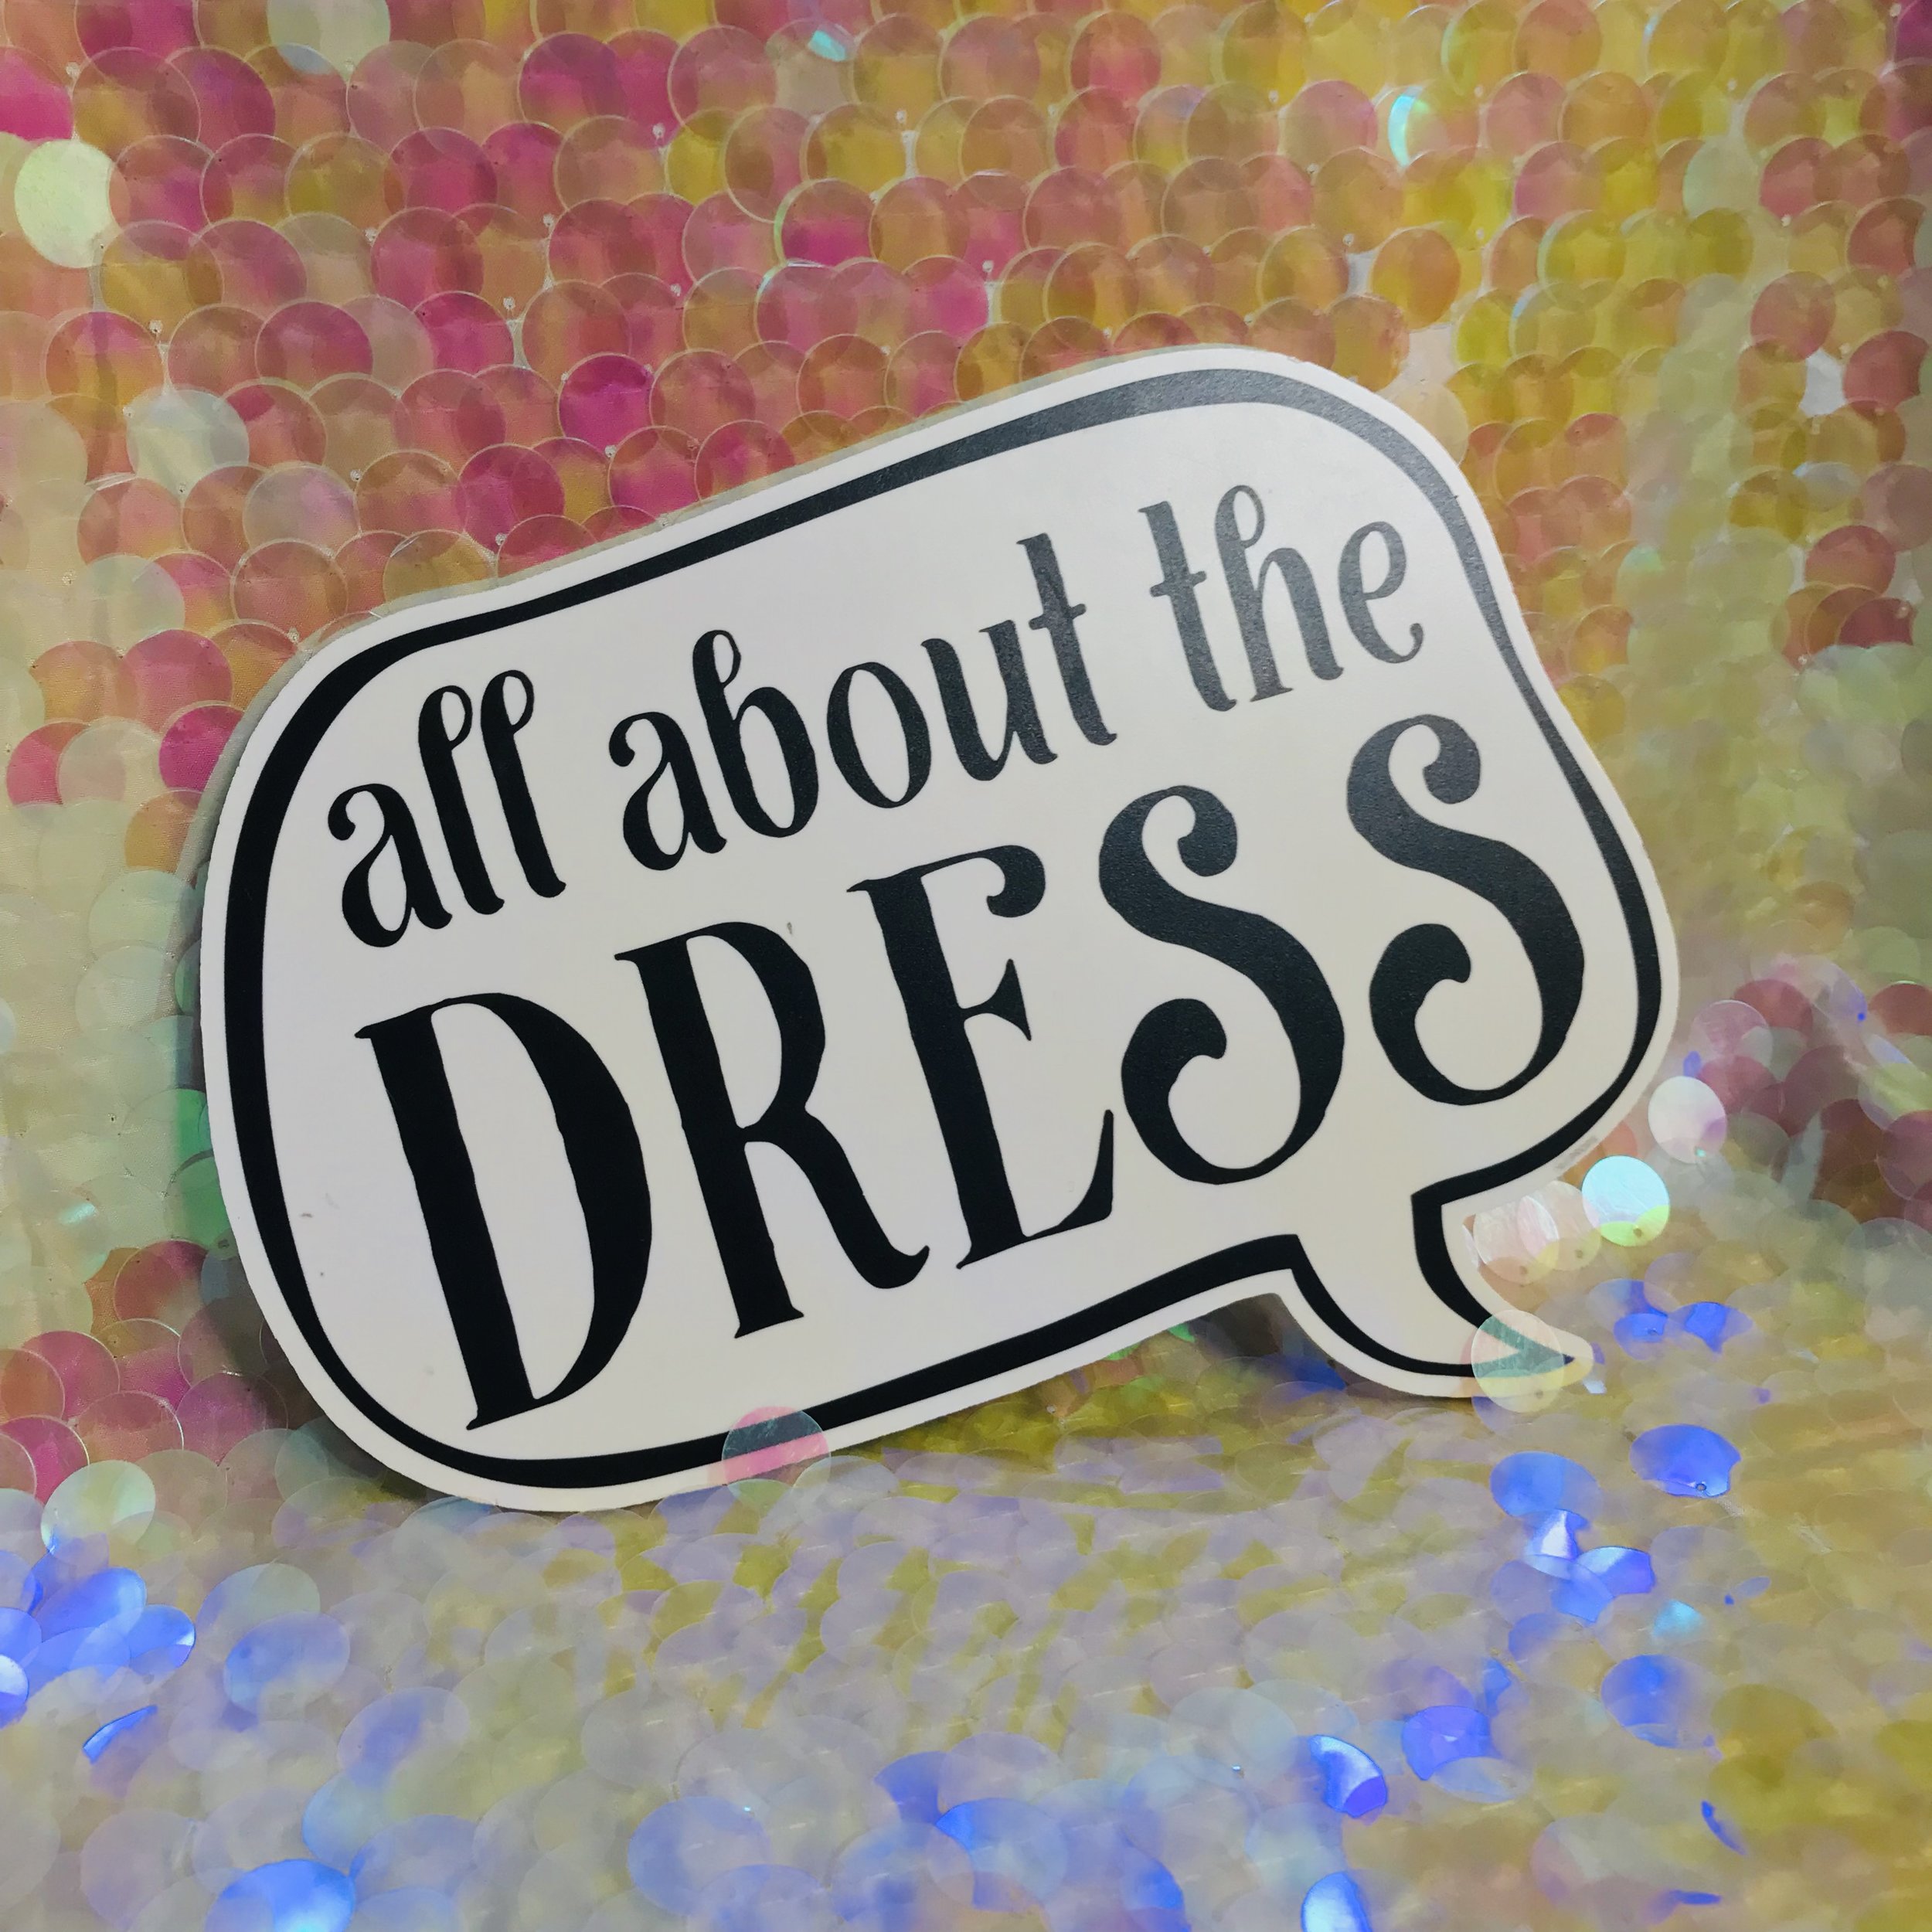 All about the dress.jpg